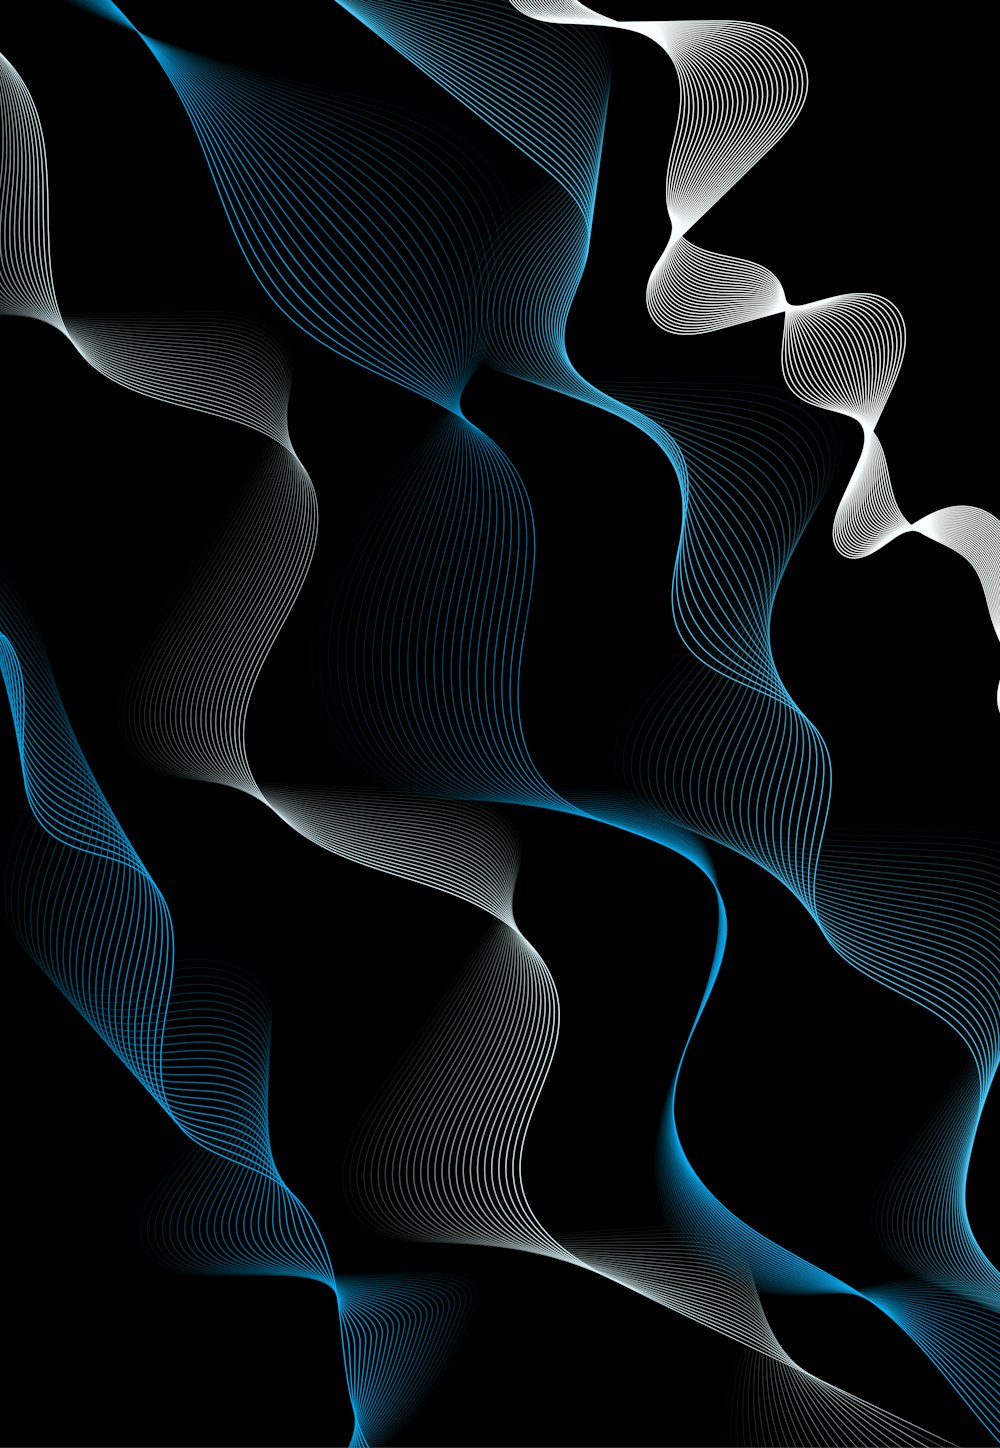 a black background with blue and white wavy lines